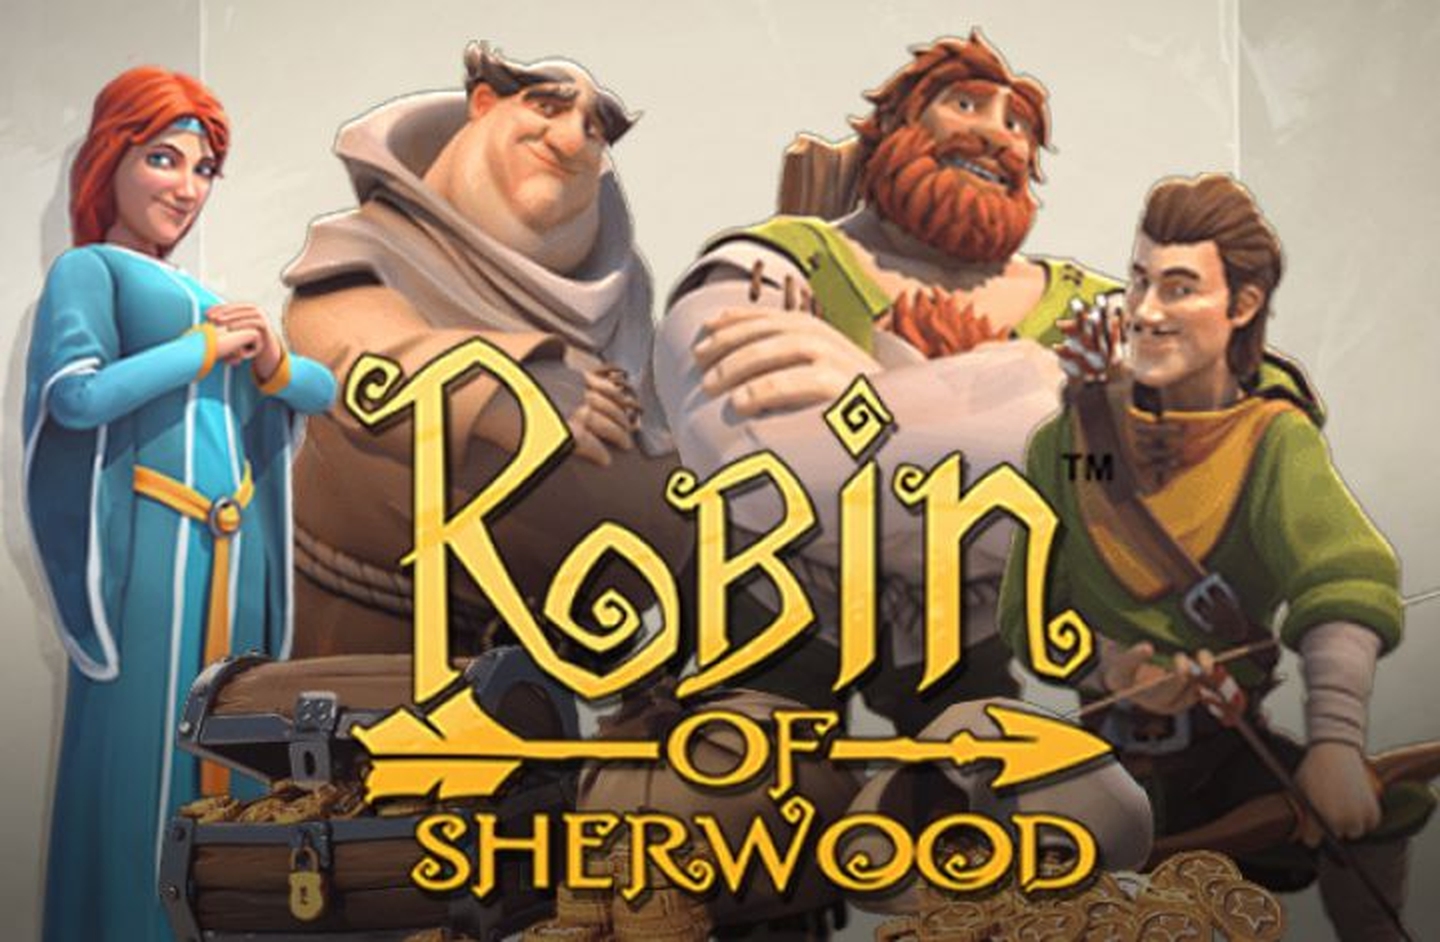 The Robin of sherwood Online Slot Demo Game by Rabcat